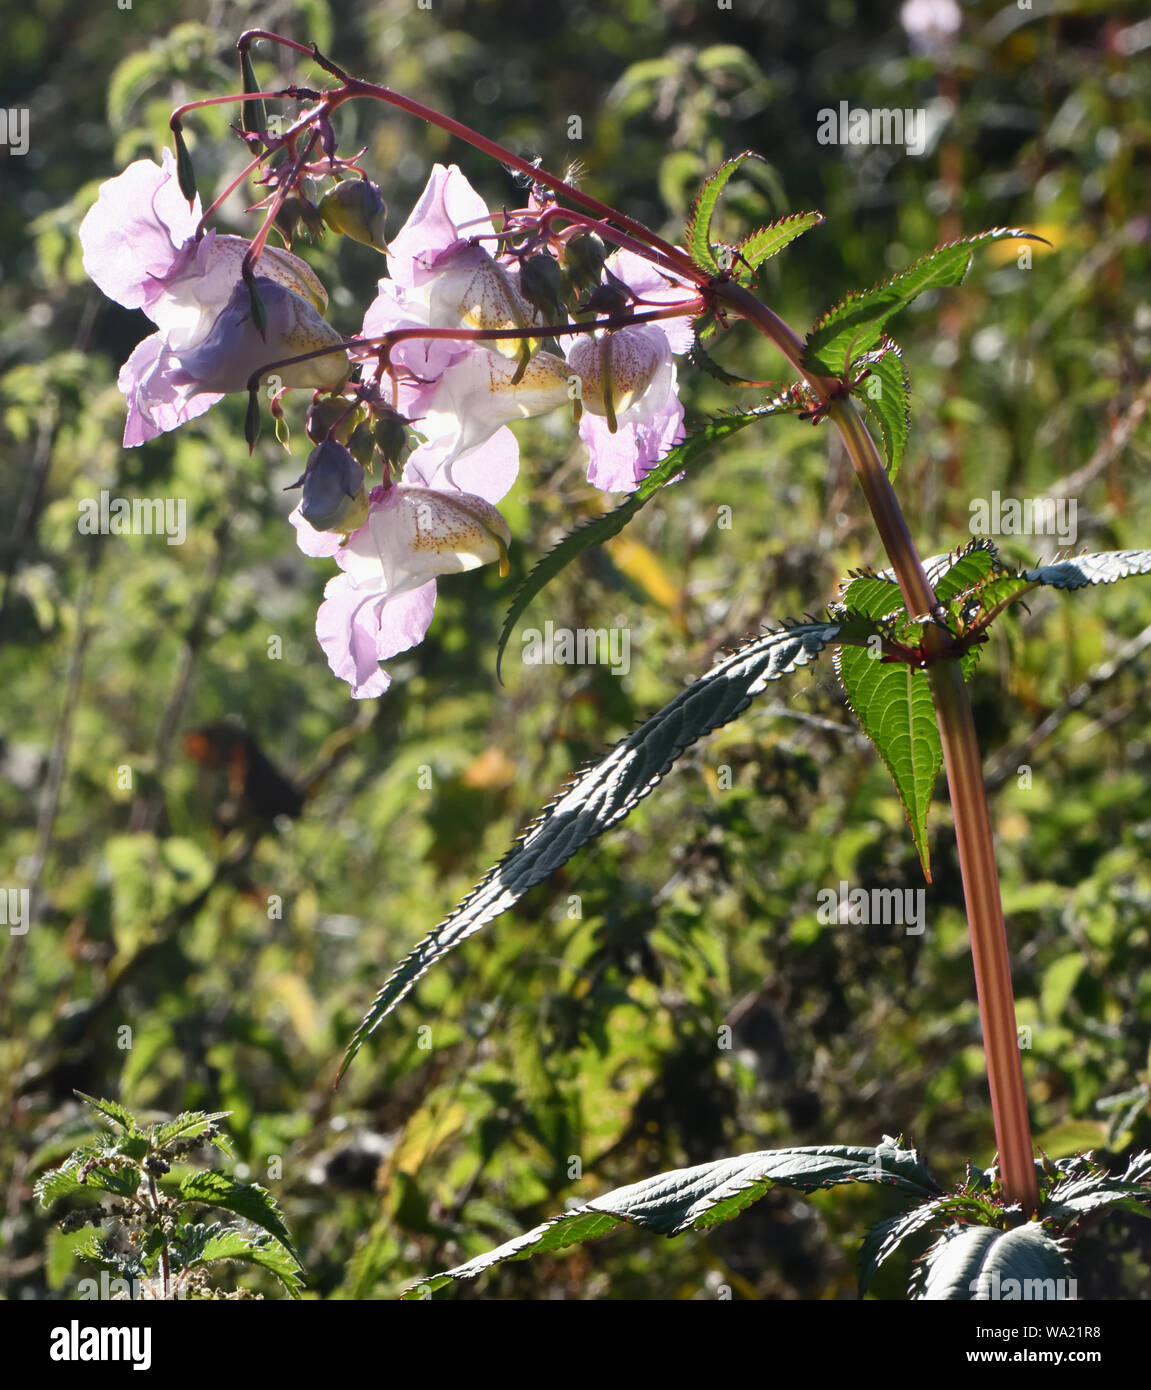 Flowers, buds and explosive seed pods of Himalayan Balsam (Impatiens glandulifera) growing amongst stinging nettles (Urtica dioica) in unusually dry s Stock Photo